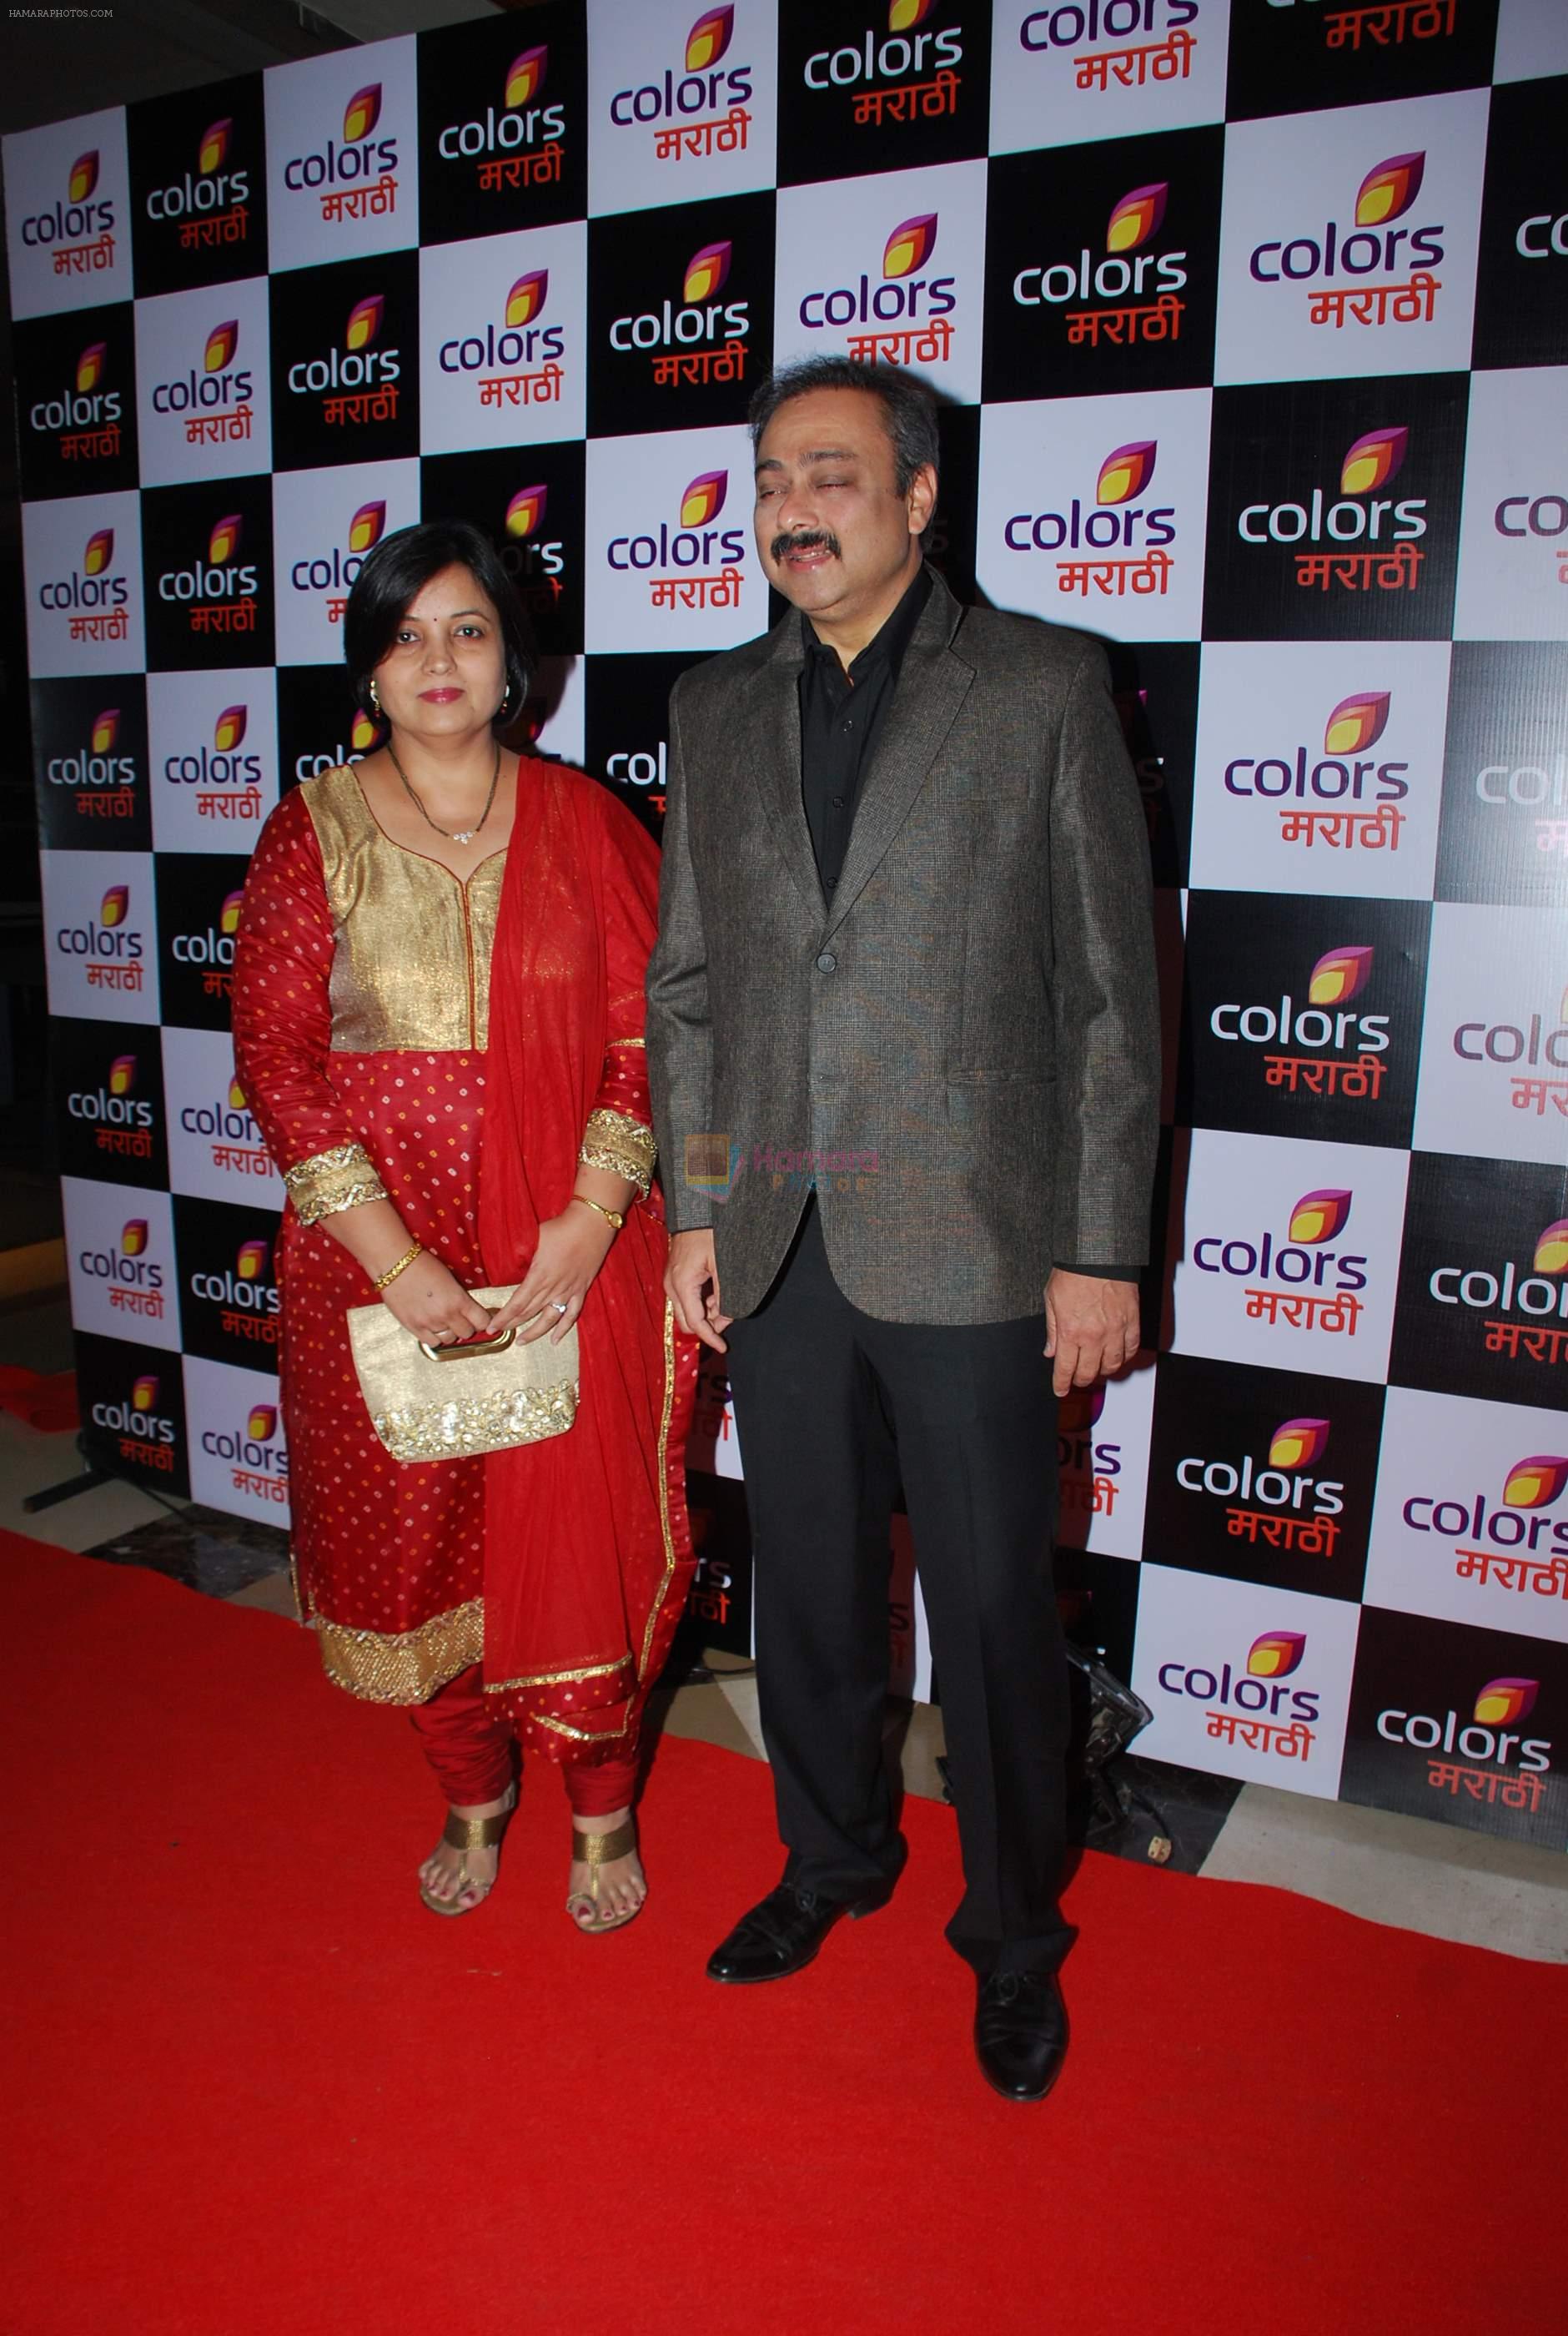 Sachin Khedekar at Colors Marathi launch in J W Marriott, Mumbai on 20th March 2015